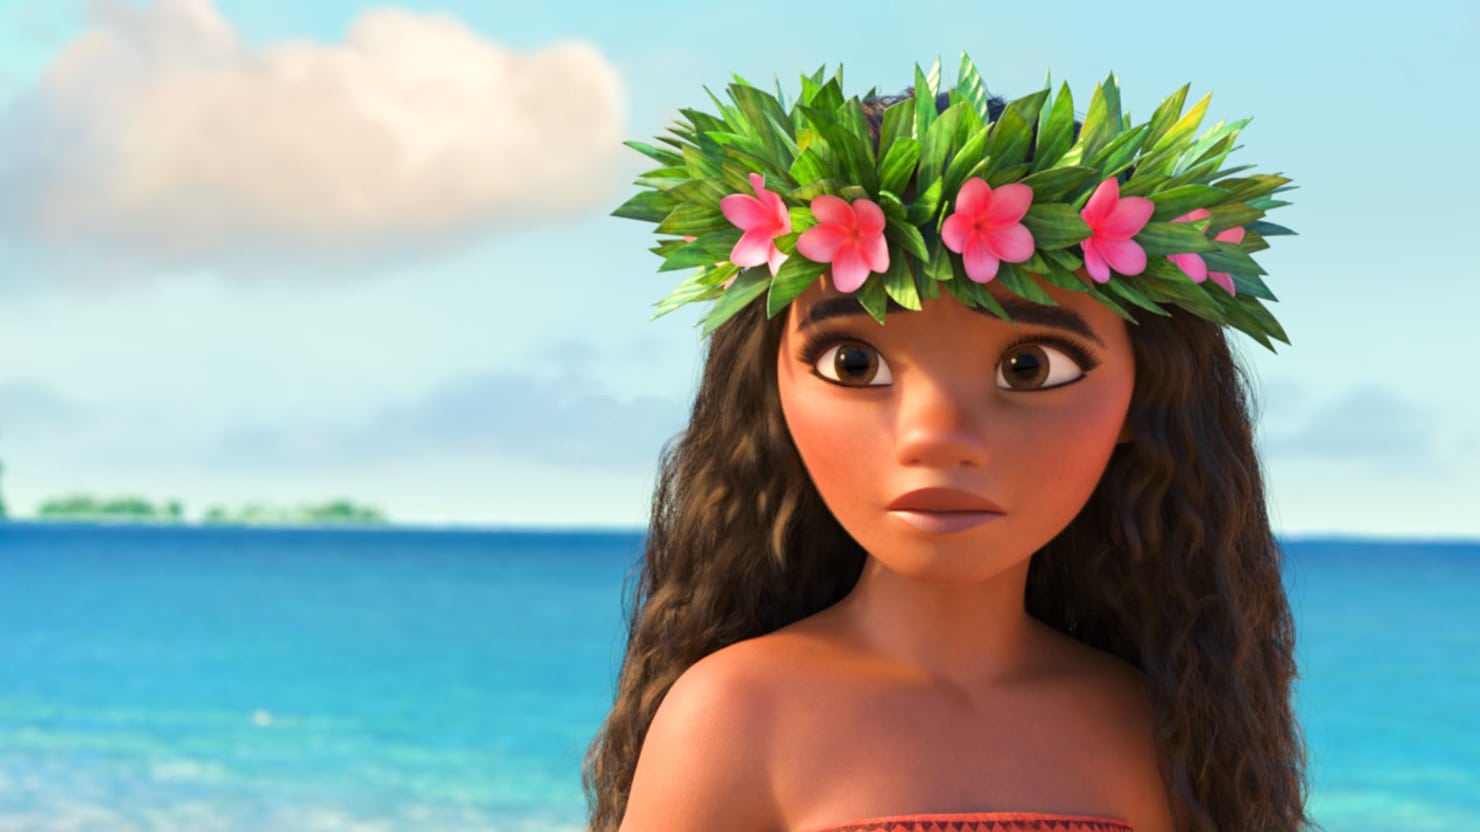 You’re Wayyyyyy Smarter Than the Average Person If You Get 75% On This General Knowledge Quiz Disney Moana (2016)